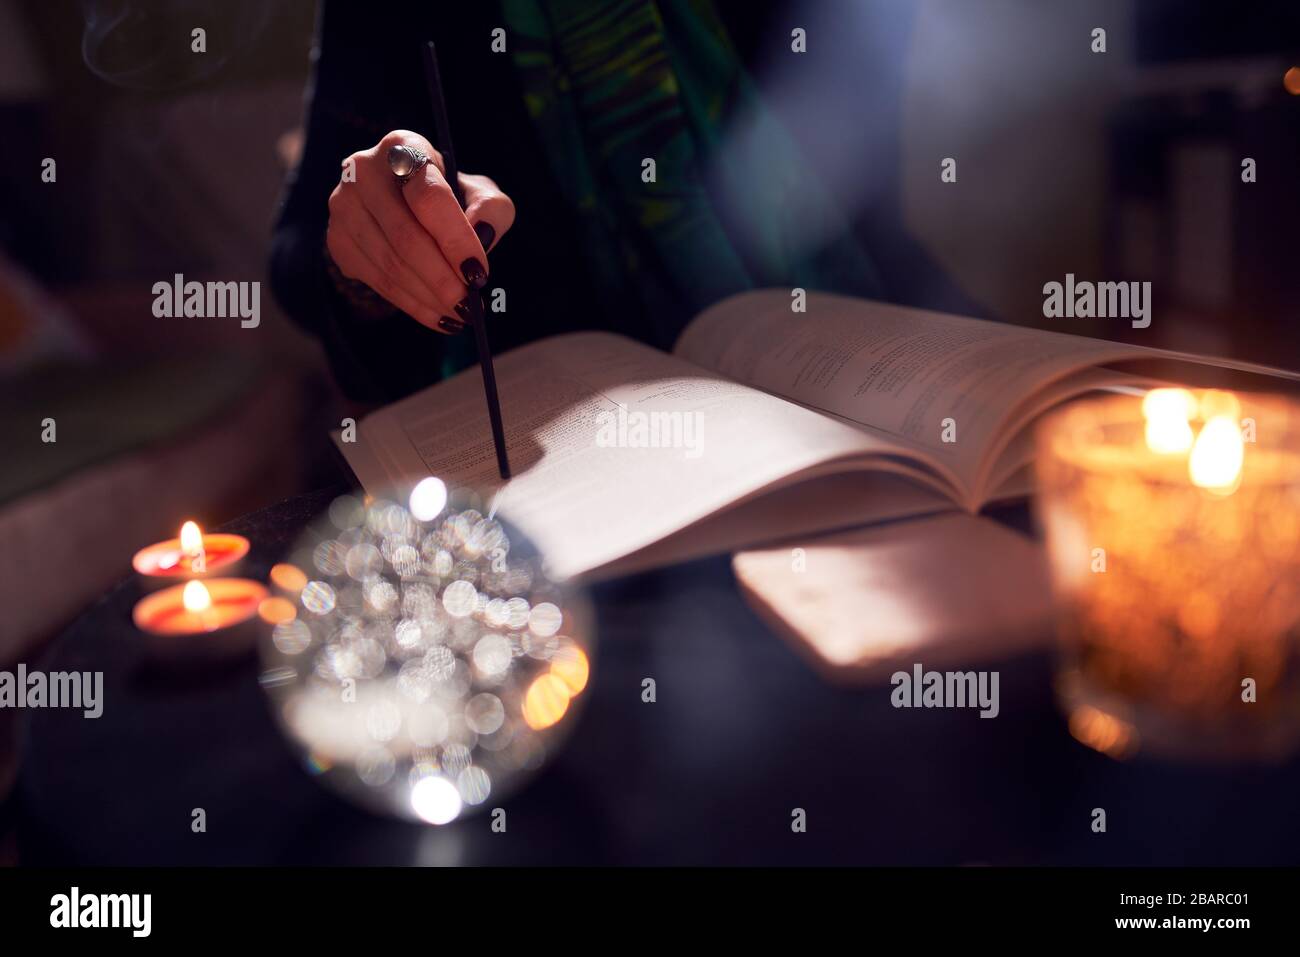 Female fortune-teller's hands, predictions books, predictions ball in room Stock Photo